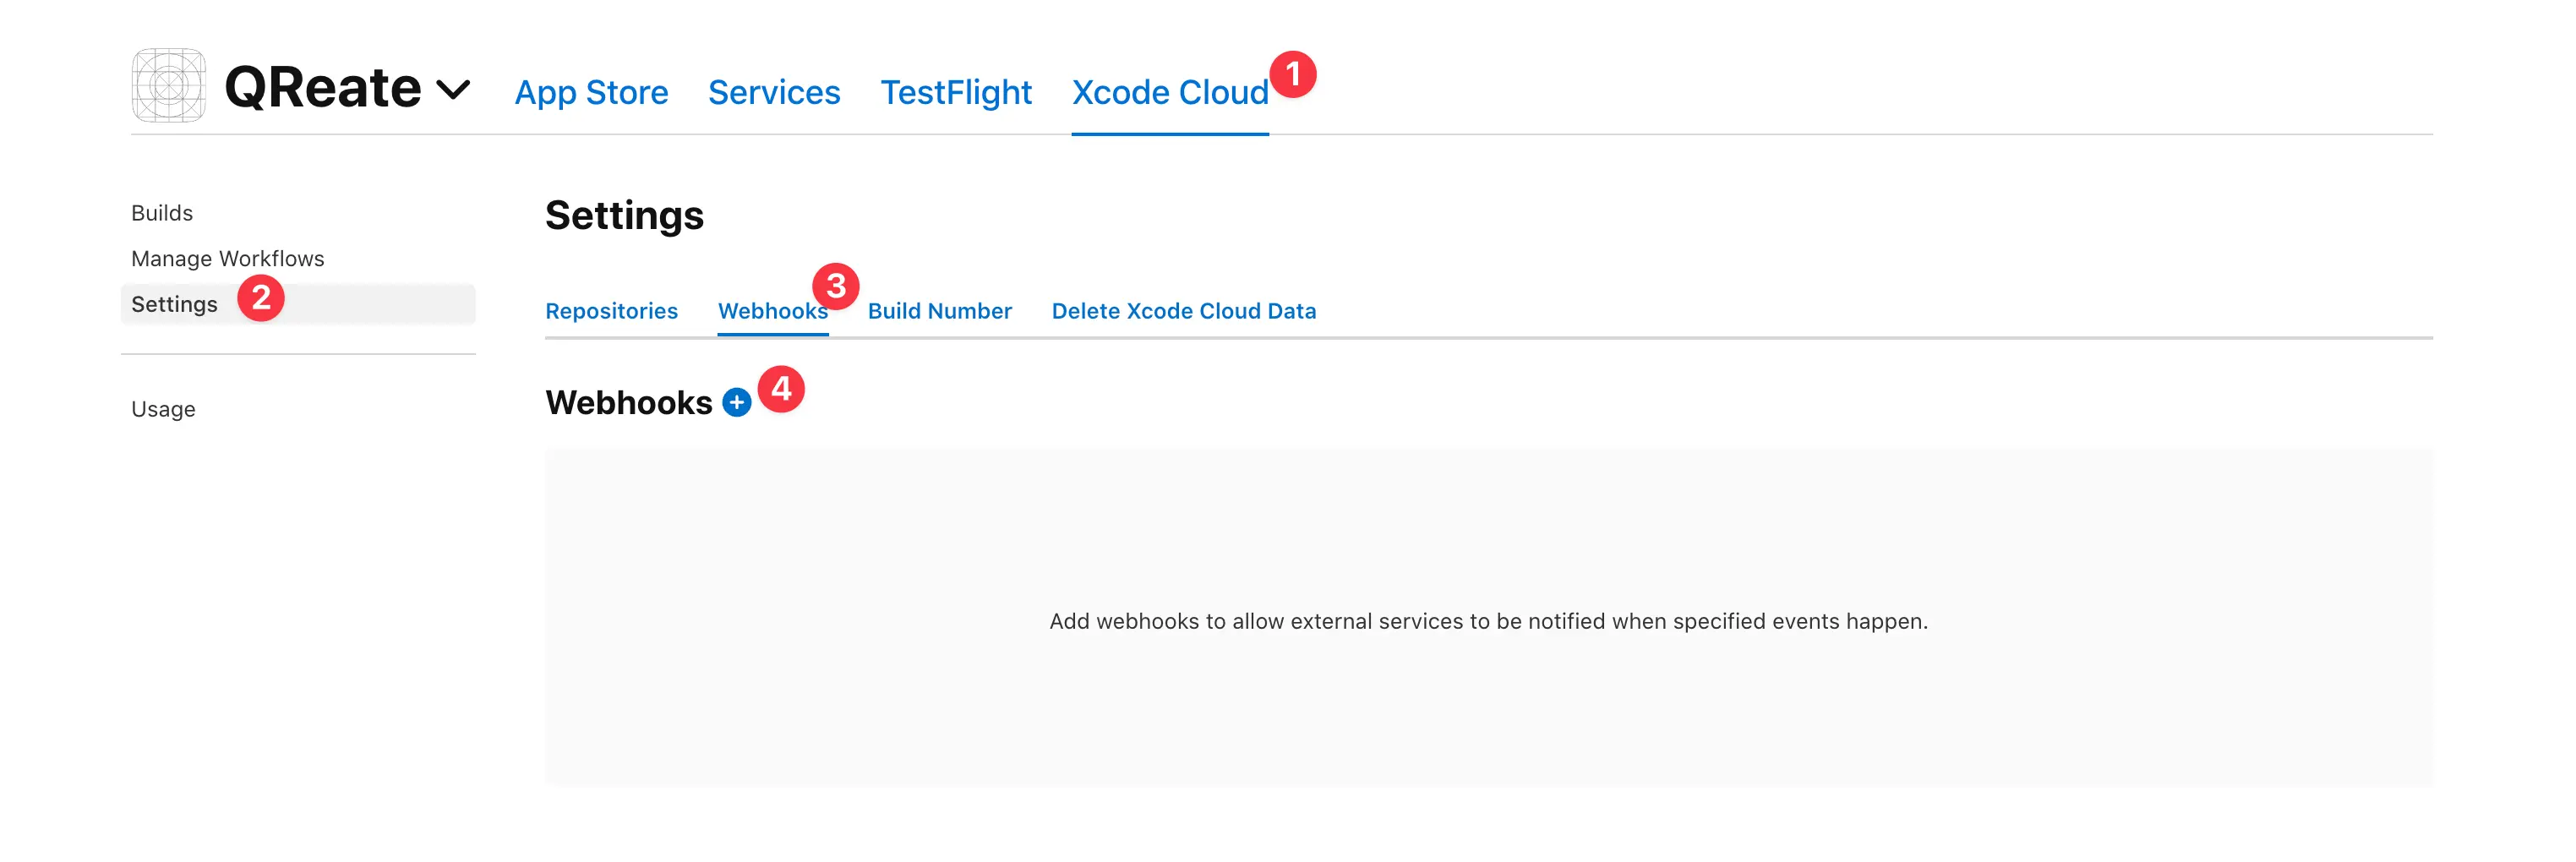 Xcode Cloud settings page